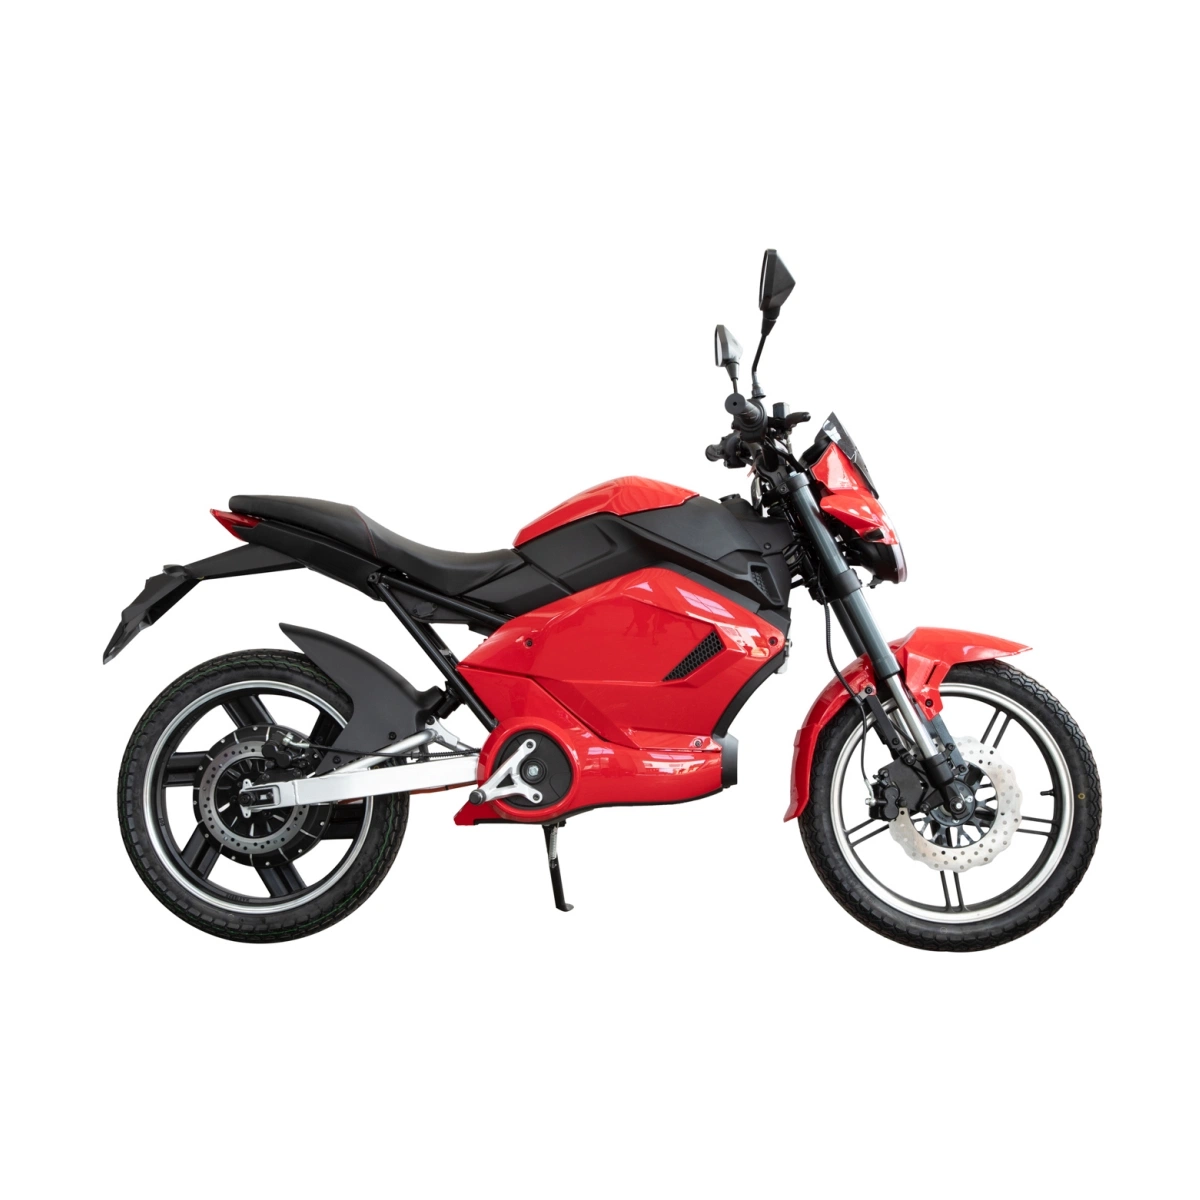 China Factory New Design EEC Racing Electric Motorcycle, Lithium Battery Electric Motorbike, E Vehicle, Powerful Sport Motorcycle, Sportbike, Street Bike